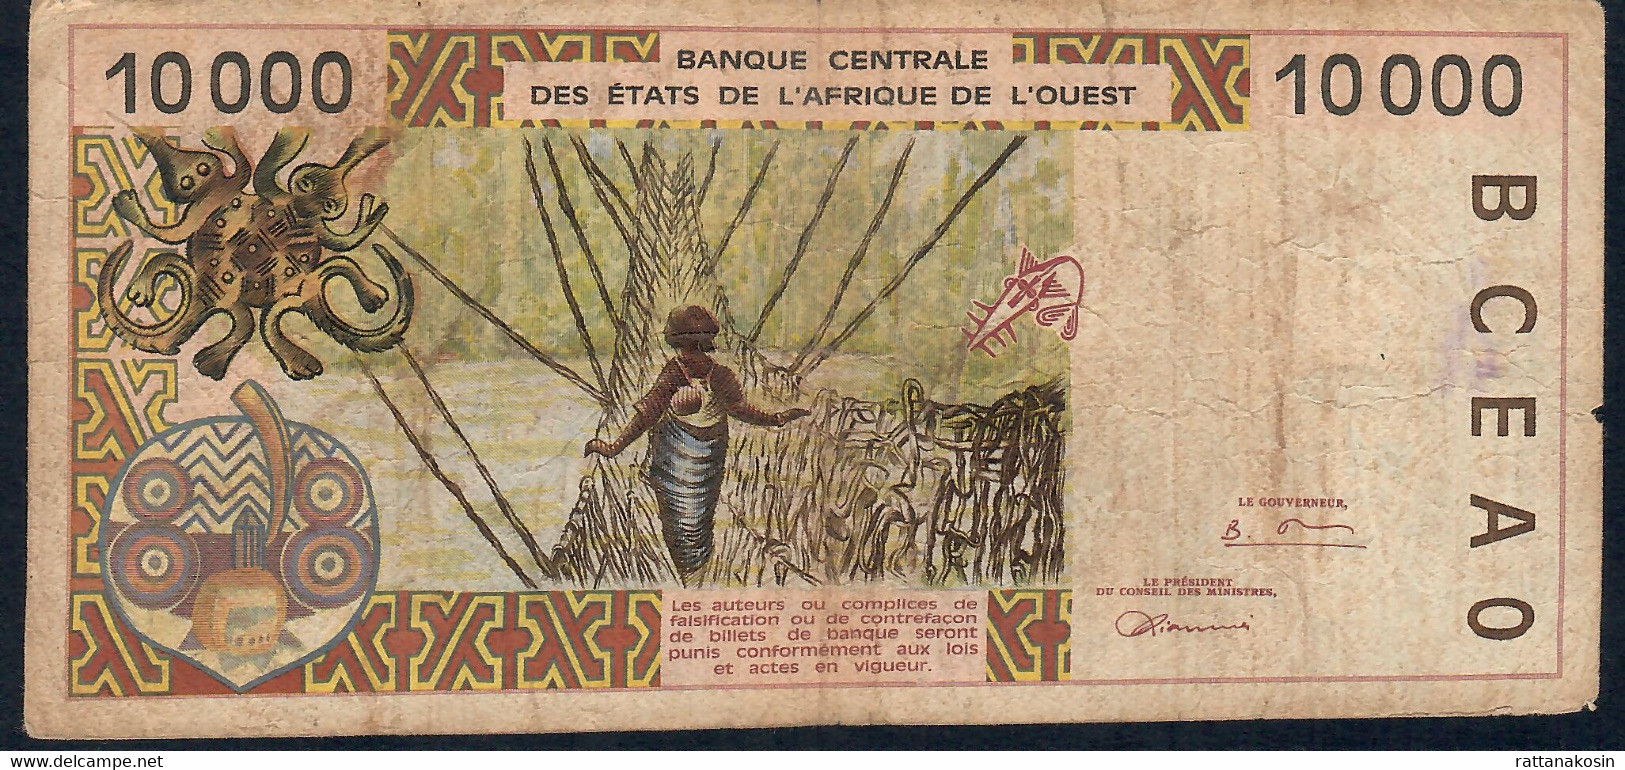 W.A.S. BENIN  P214Bd  10000 Or 10.000 FRANCS (19)96 1996 Signature 28      FINE Only 1  P.h.! - West African States